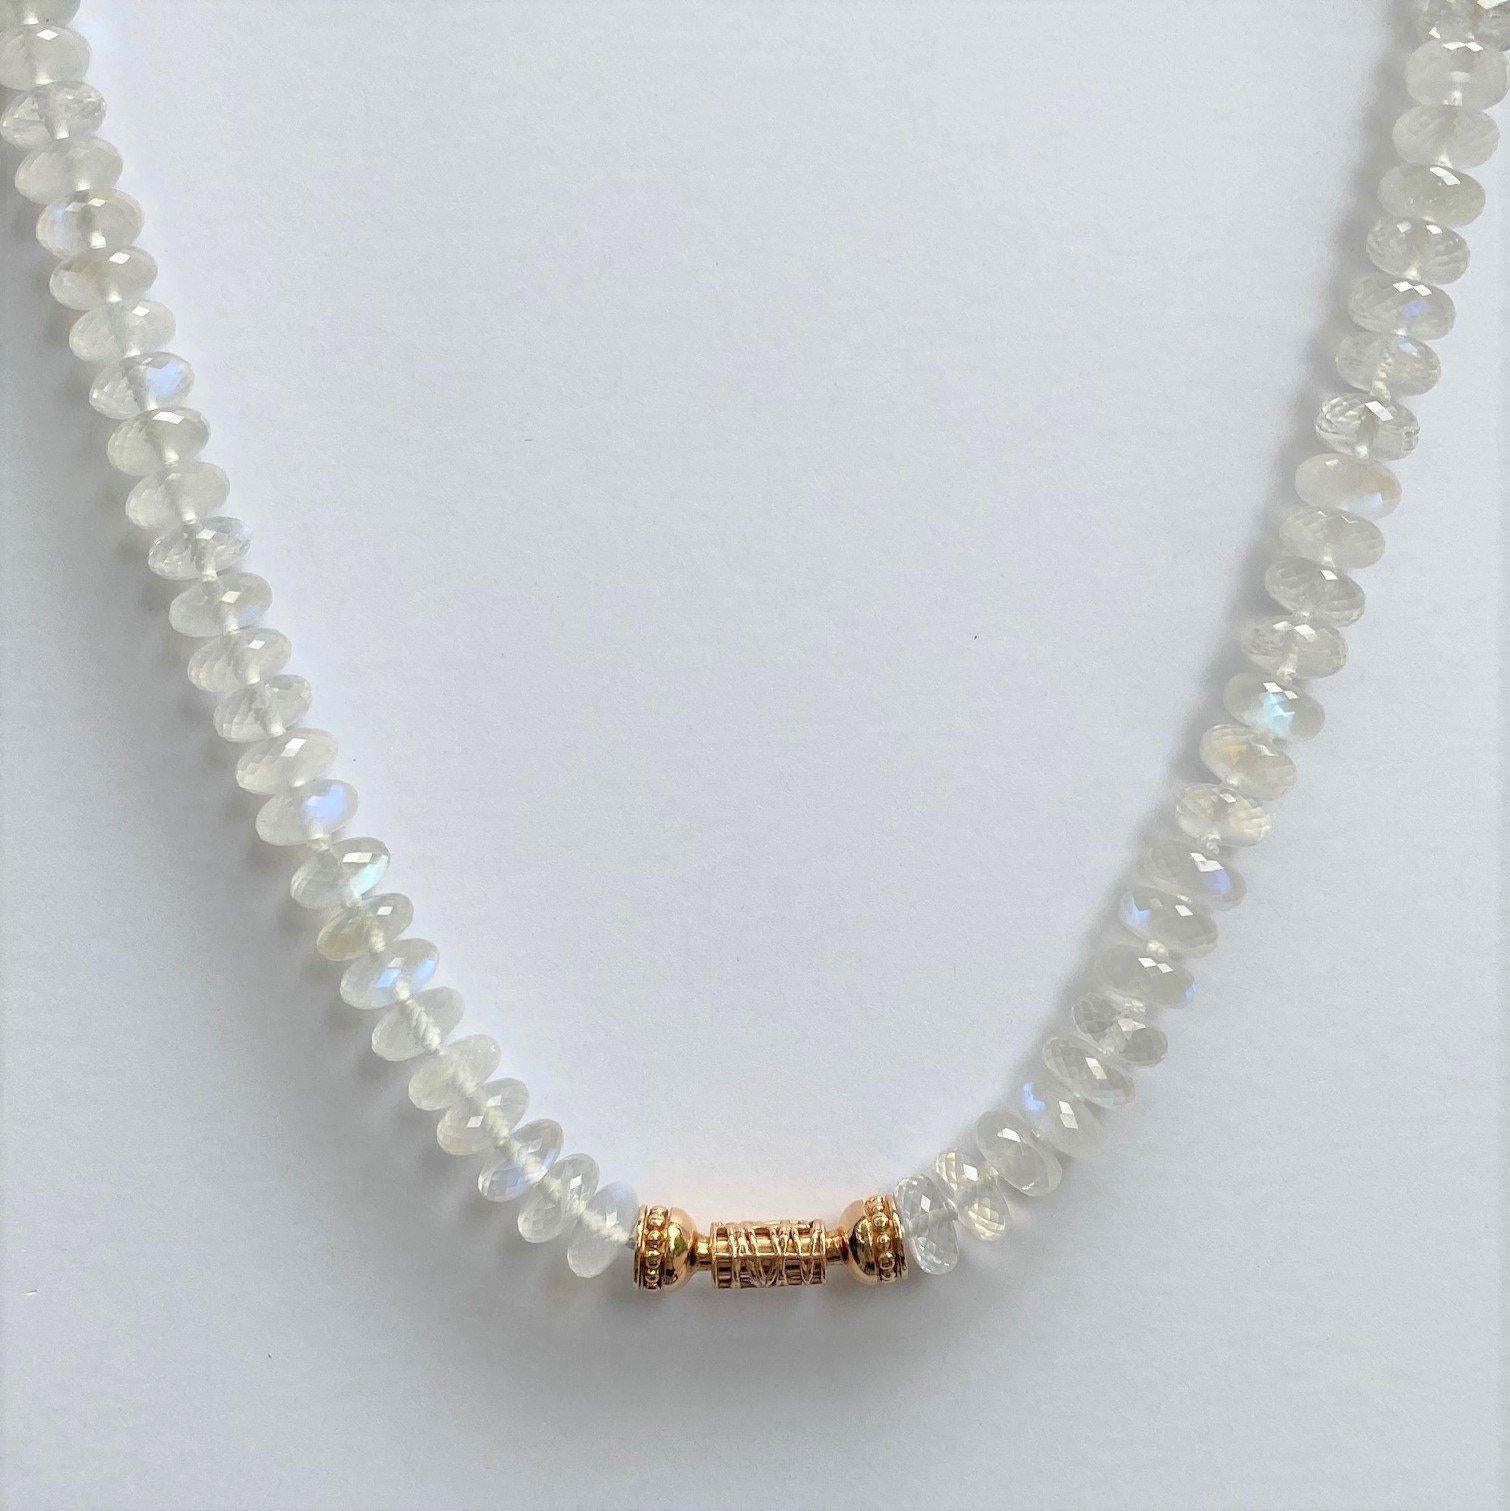 A 17  inch faceted moonstone modullyn strand with 158 carats of moonstone and 18k rose gold ends with a 13.1mm Tahitian maki-e pearl clasp with 24k gold enamel and 18k white gold nittle parts. Includes an 18k rose gold webbed clasp enabling the